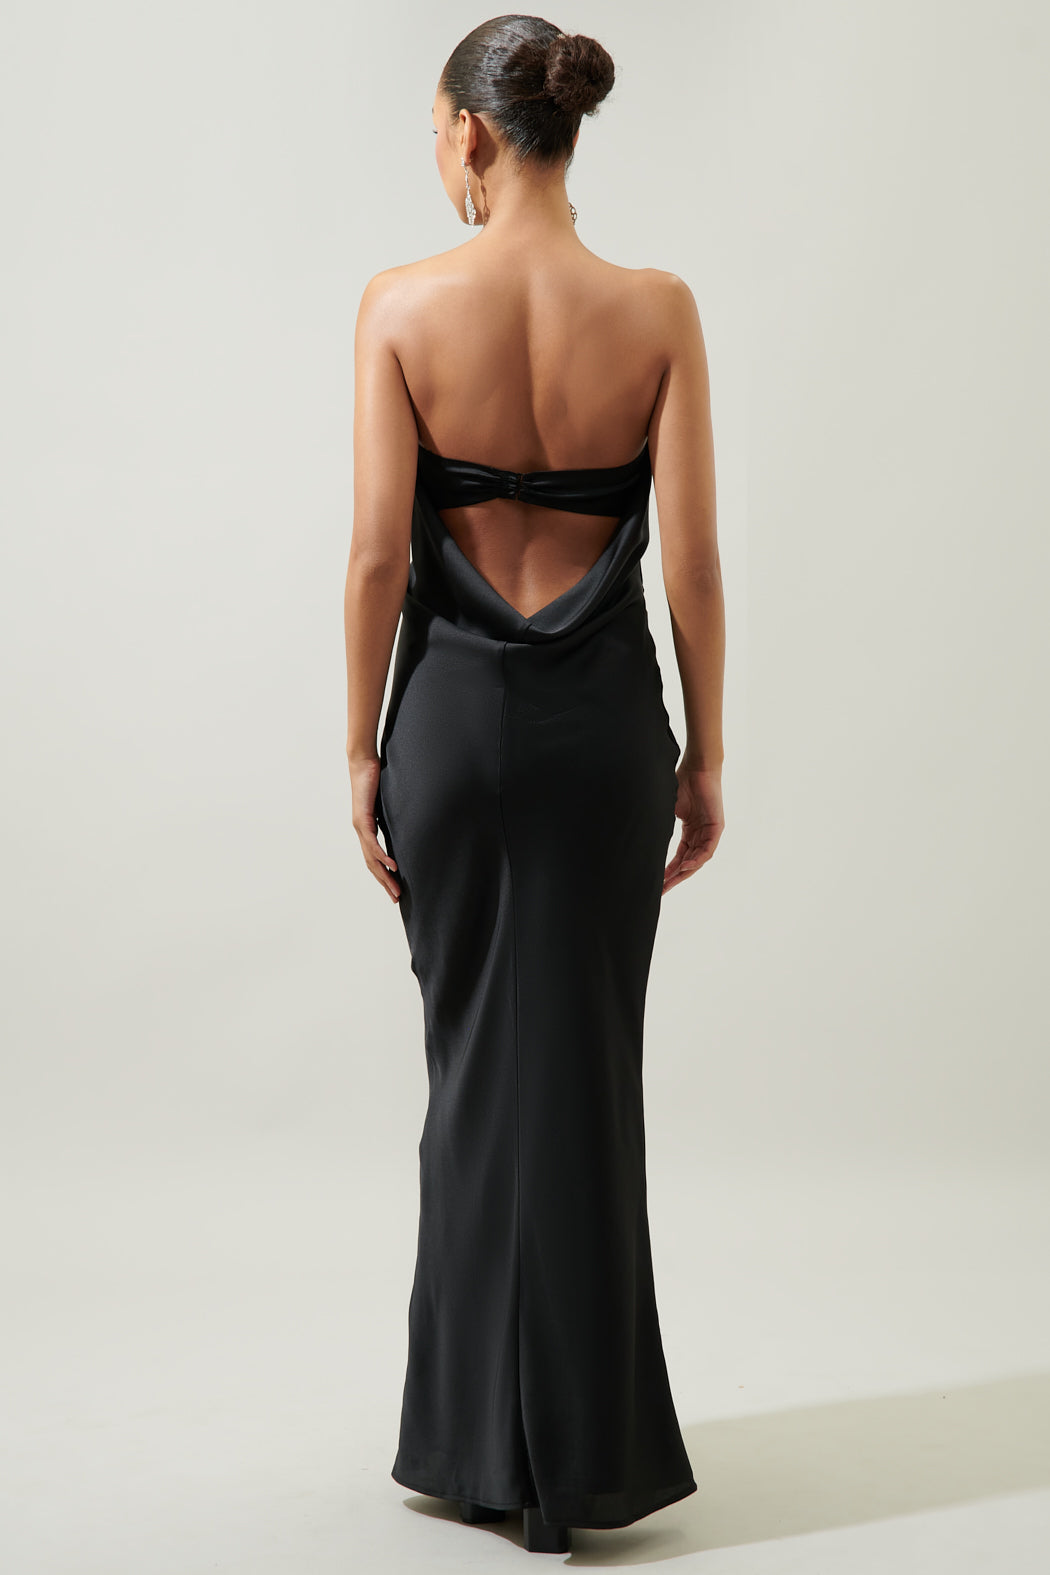 Y2K Summer Womens Backless Strapless Maxi Dress Casual With Hip Suspender  Casual, Sexy, And Slimming Hip Filled From Long005, $11.91